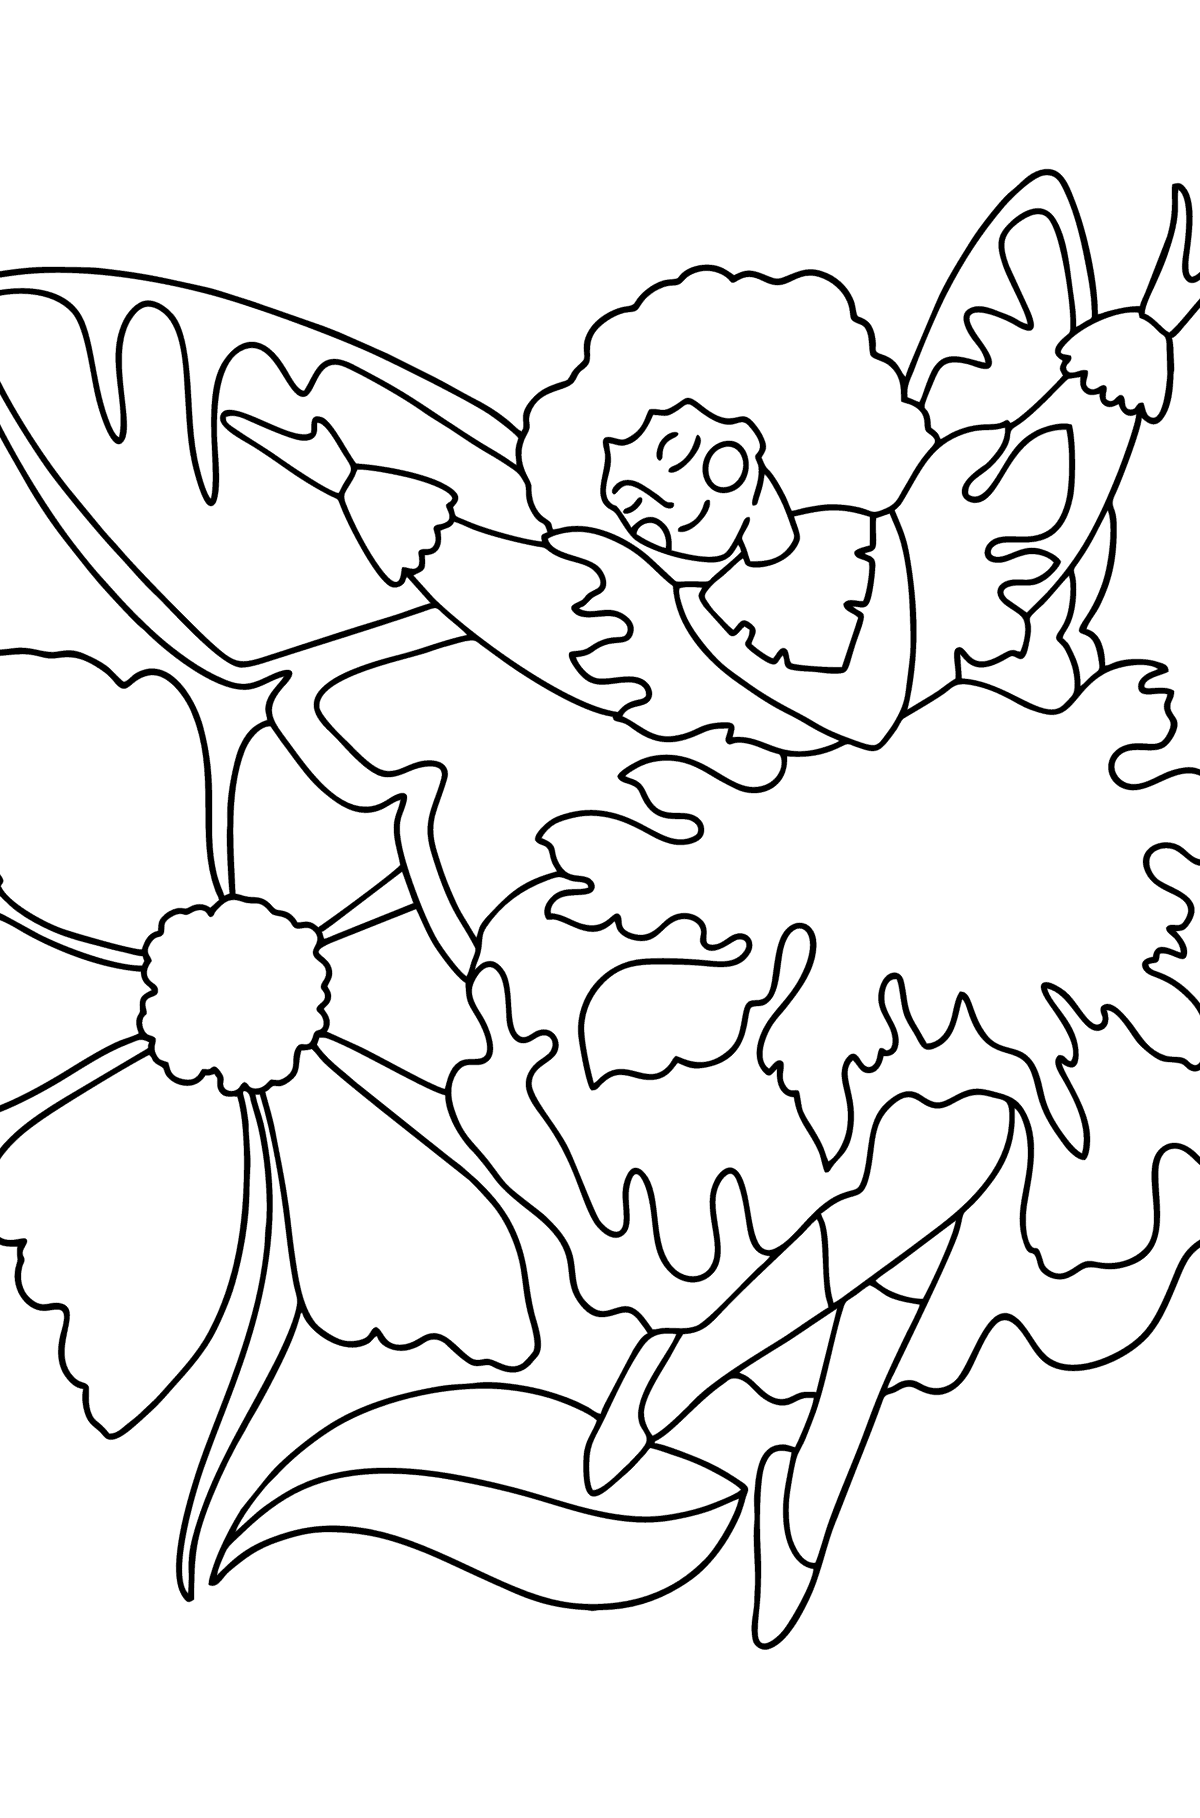 Fairy flies coloring page - Coloring Pages for Kids